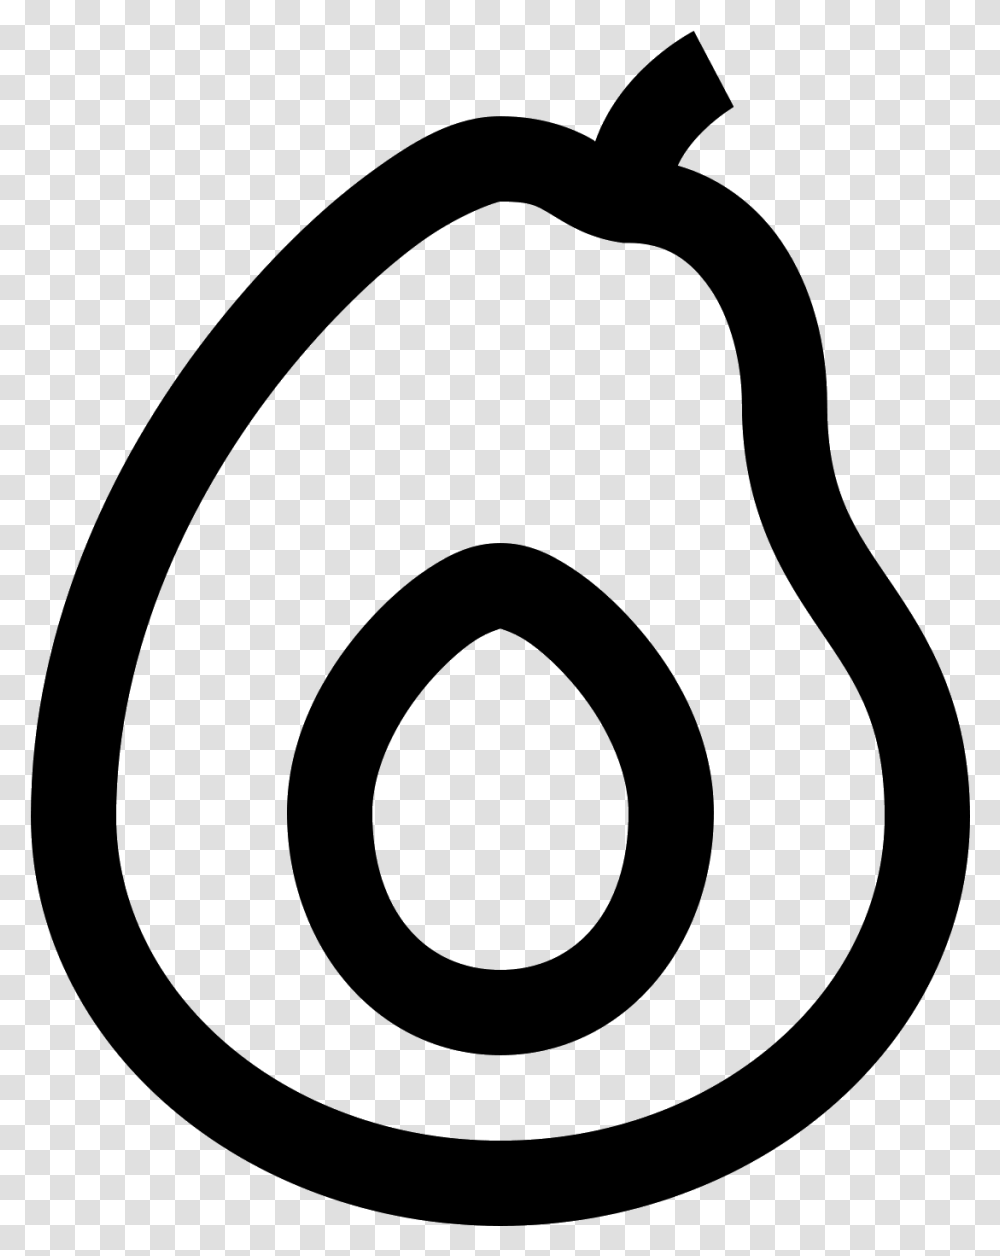 It's The Outline Of An Avocado That Has Been Cut In Aguacate Blanco Y Negro, Gray, World Of Warcraft Transparent Png